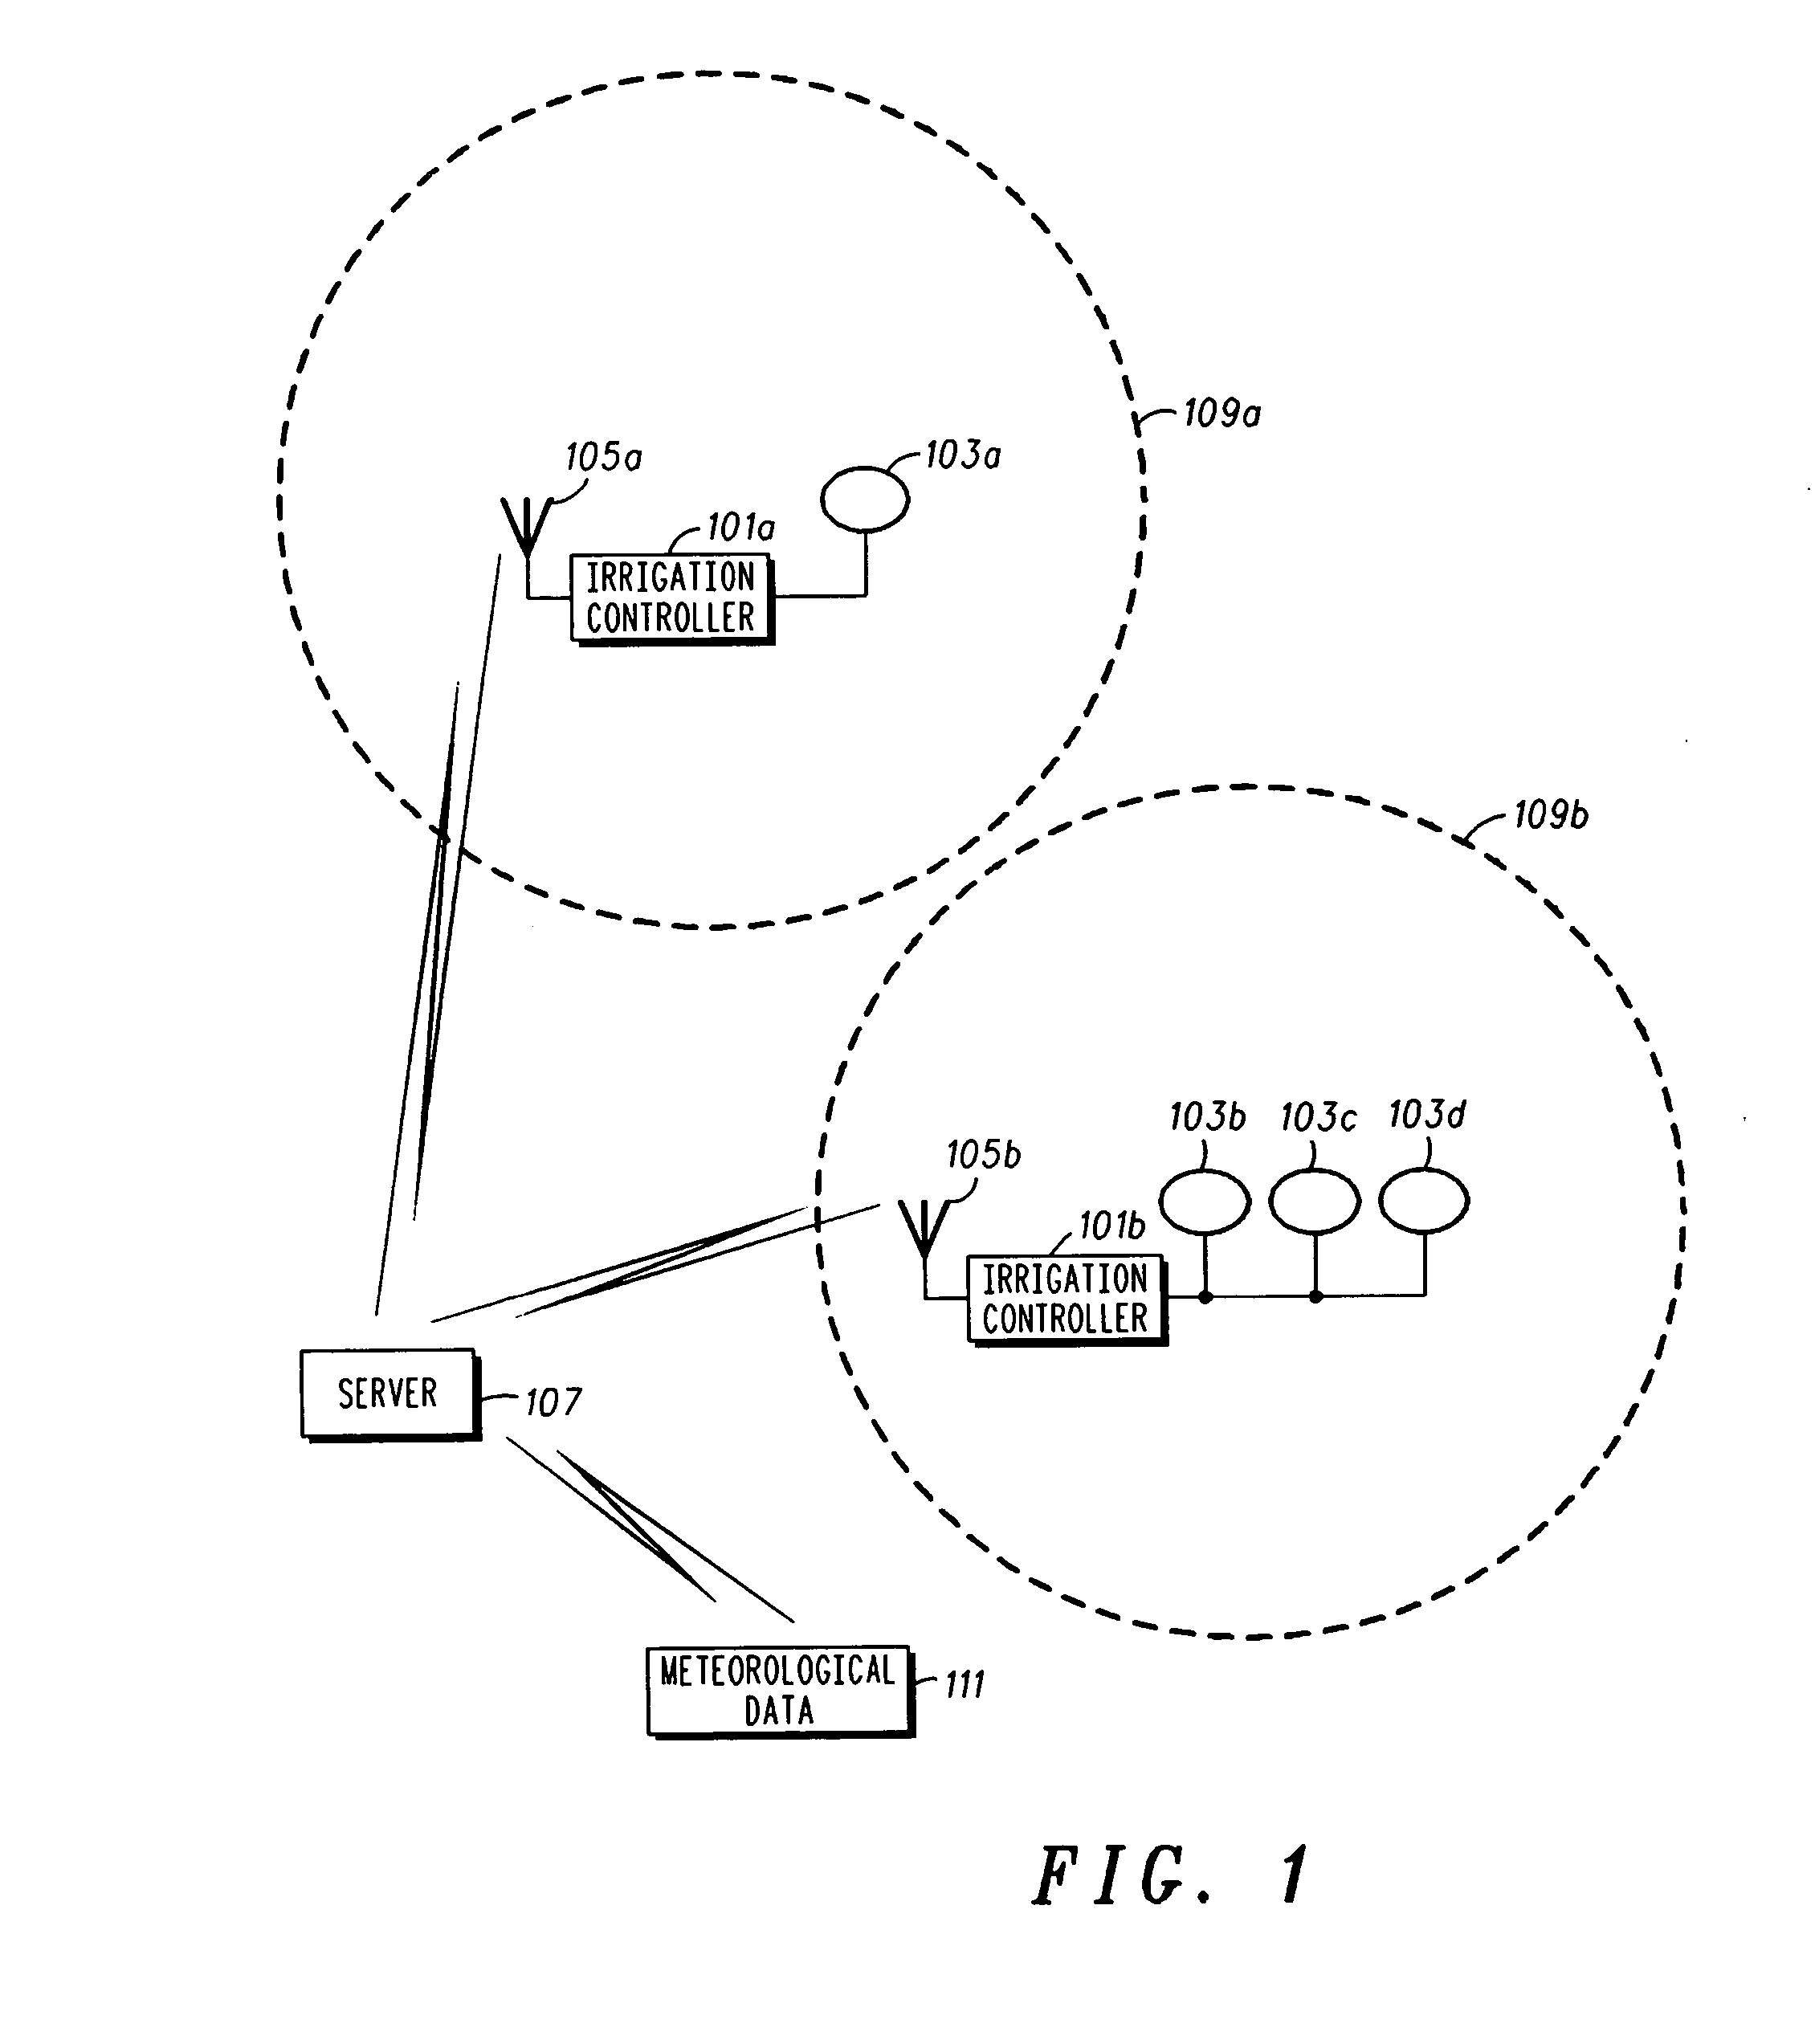 Method and system for transmitting and utilizing forecast meteorological data for irrigation controllers